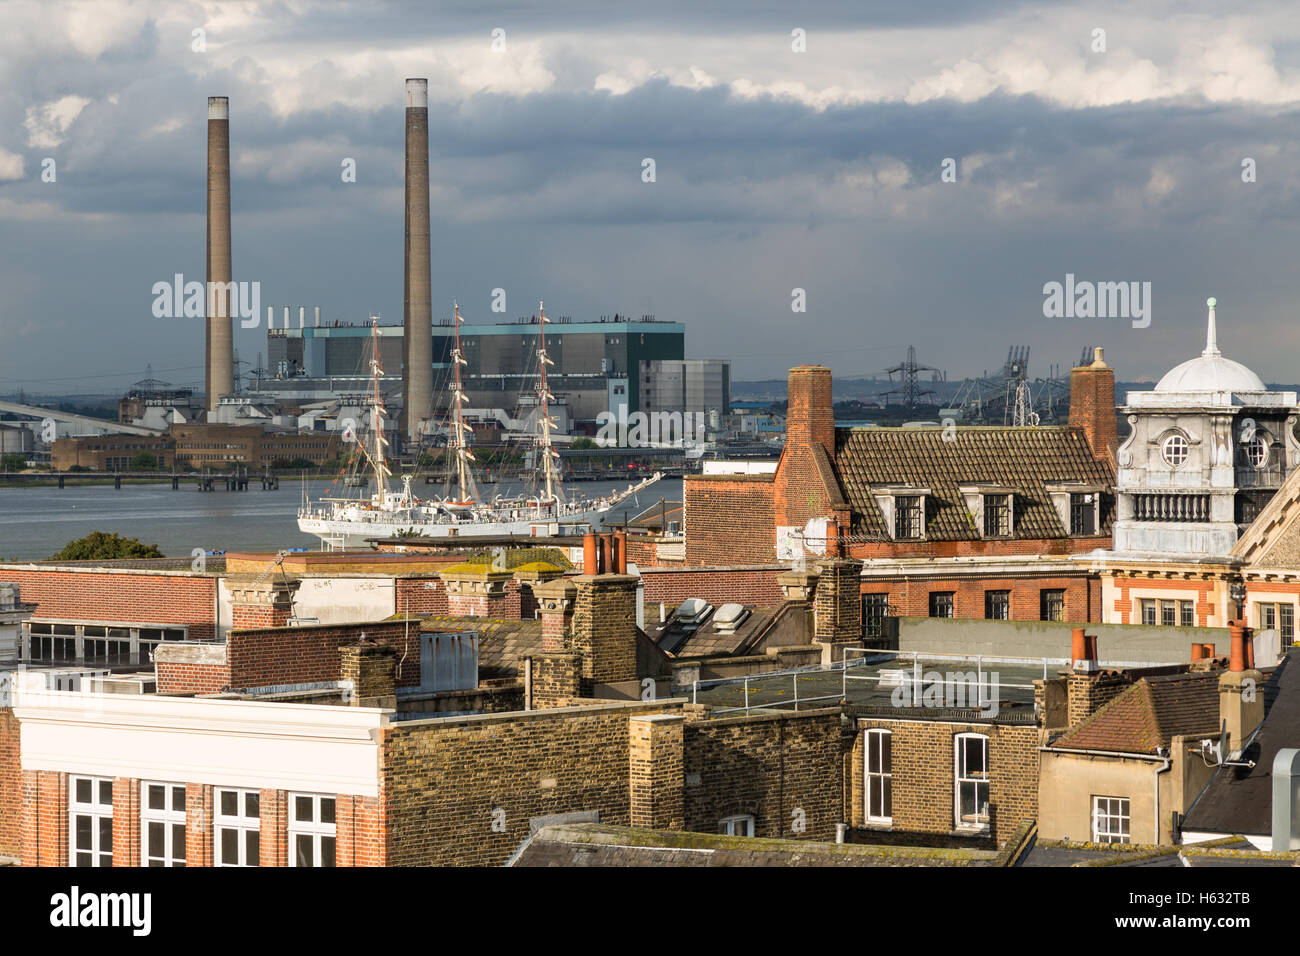 Image of Gravesend town centre roof tops as a tall ship sails by Stock Photo